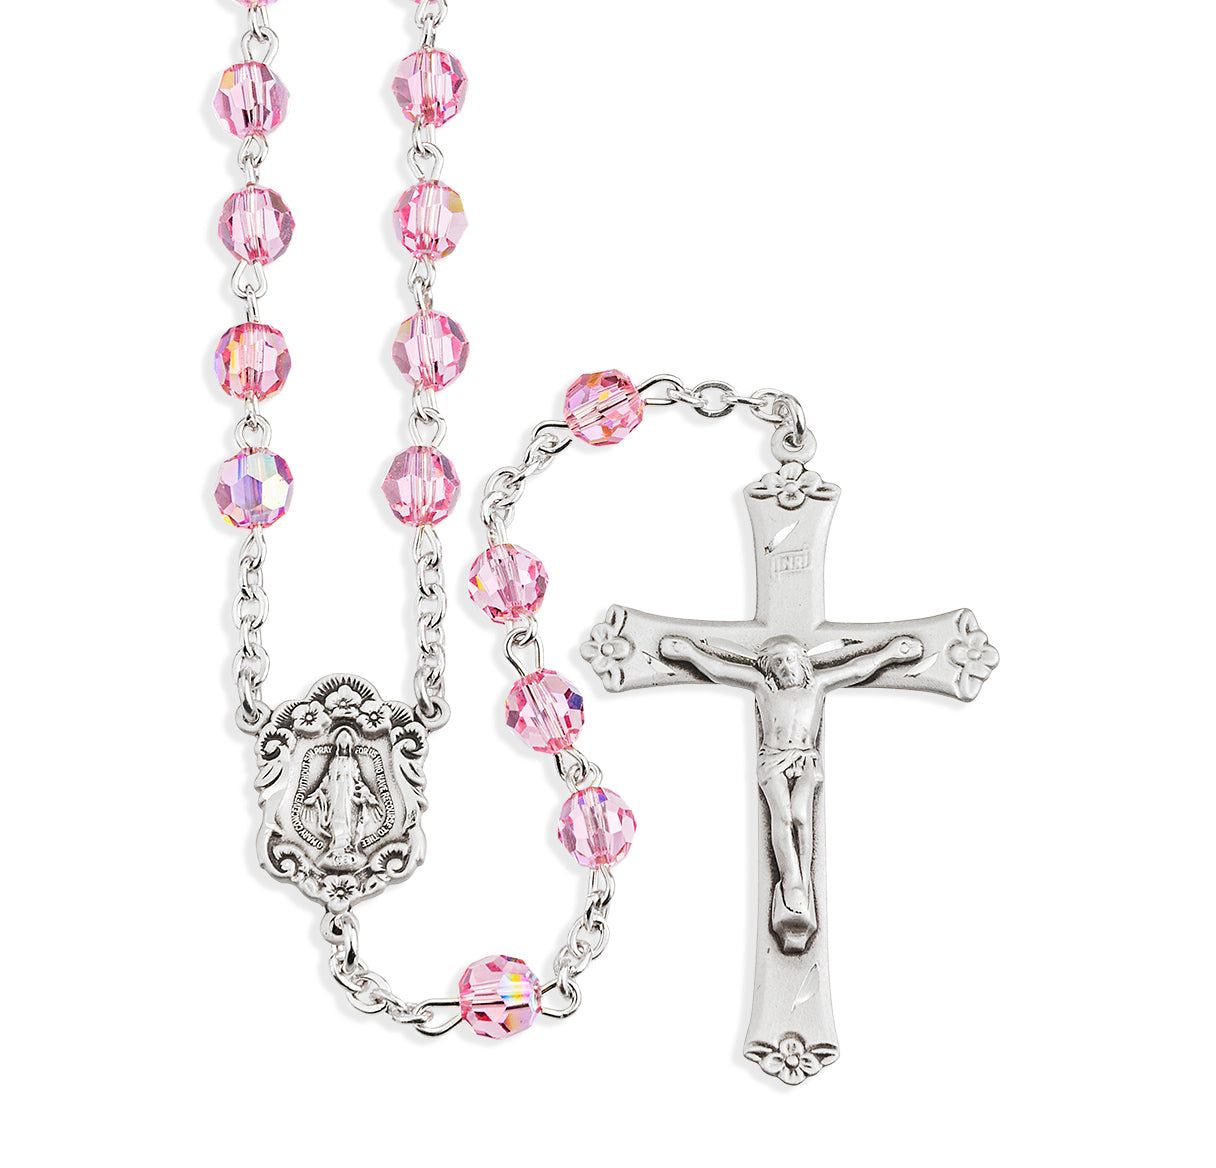 Sterling Silver Rosary Hand Made with Swarovski Crystal 6mm Light Rose Faceted Round Beads by HMH